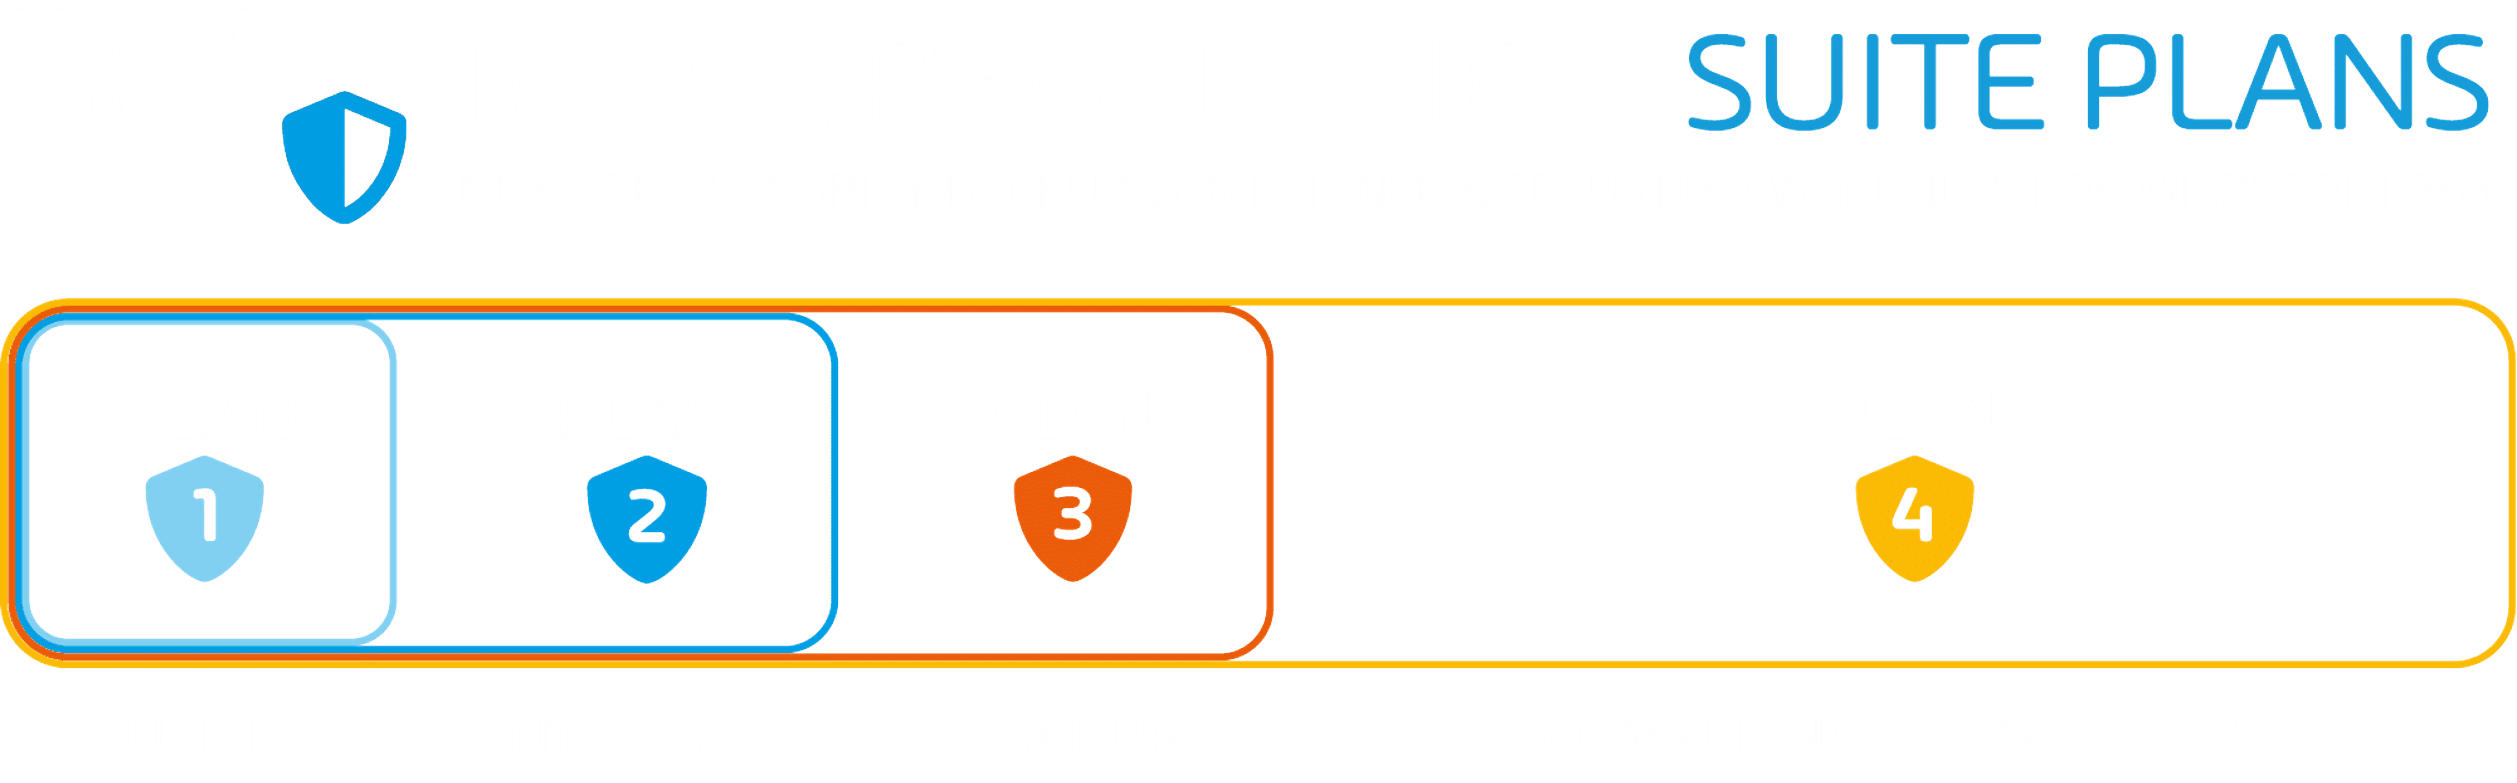 Hornetsecurity 365 Total Protection